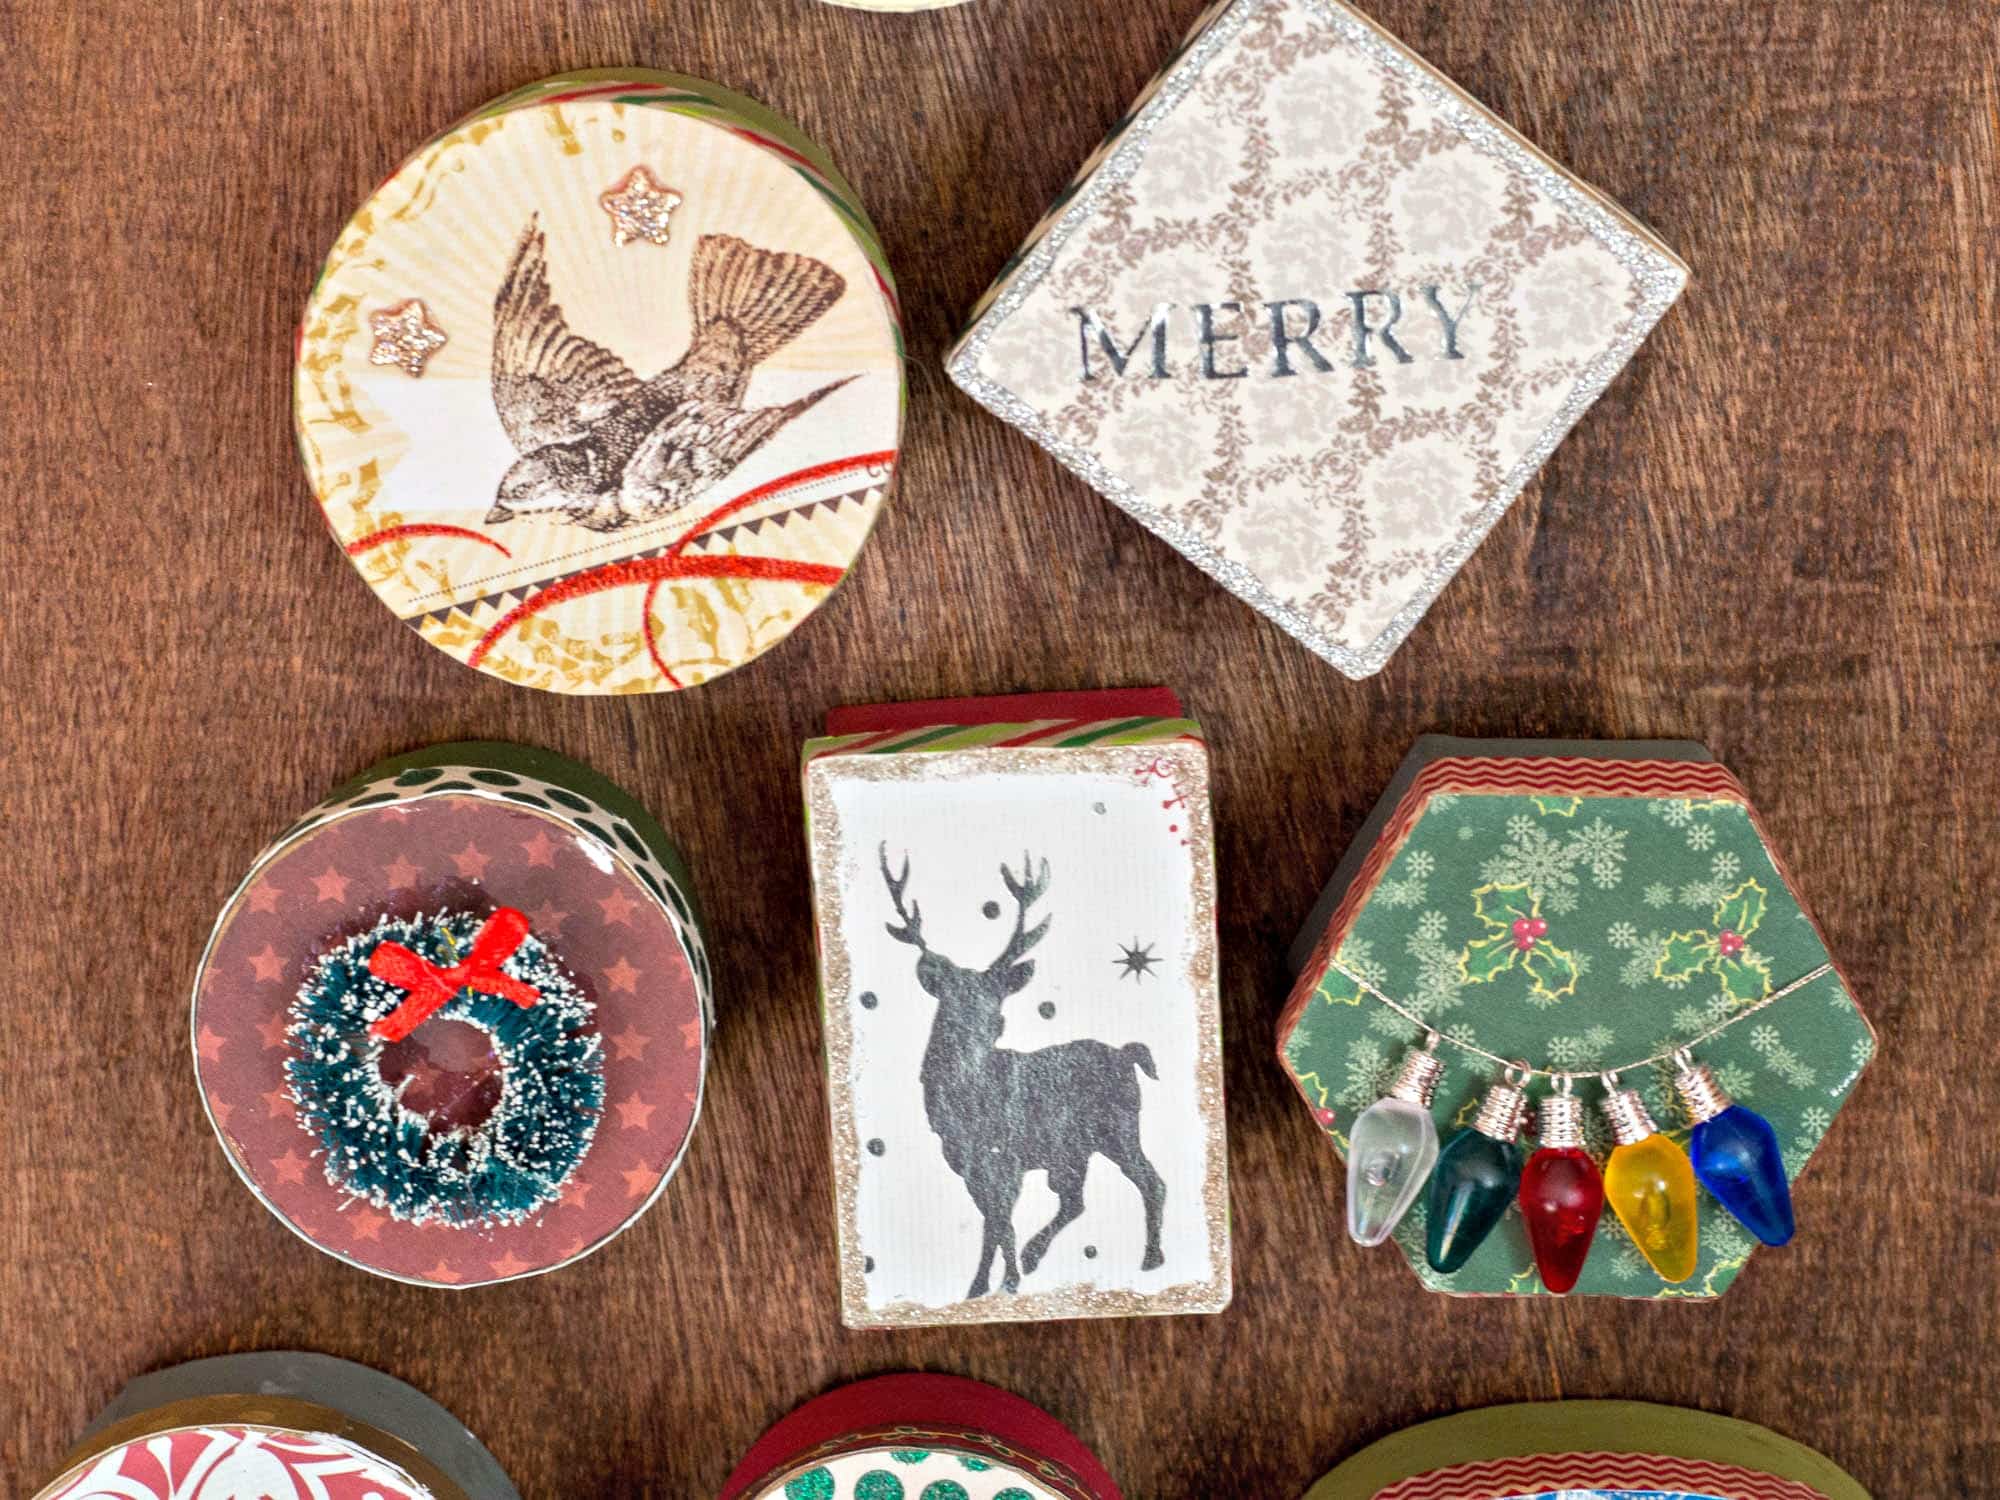 A DIY advent calendar with a collection of Christmas ornaments.